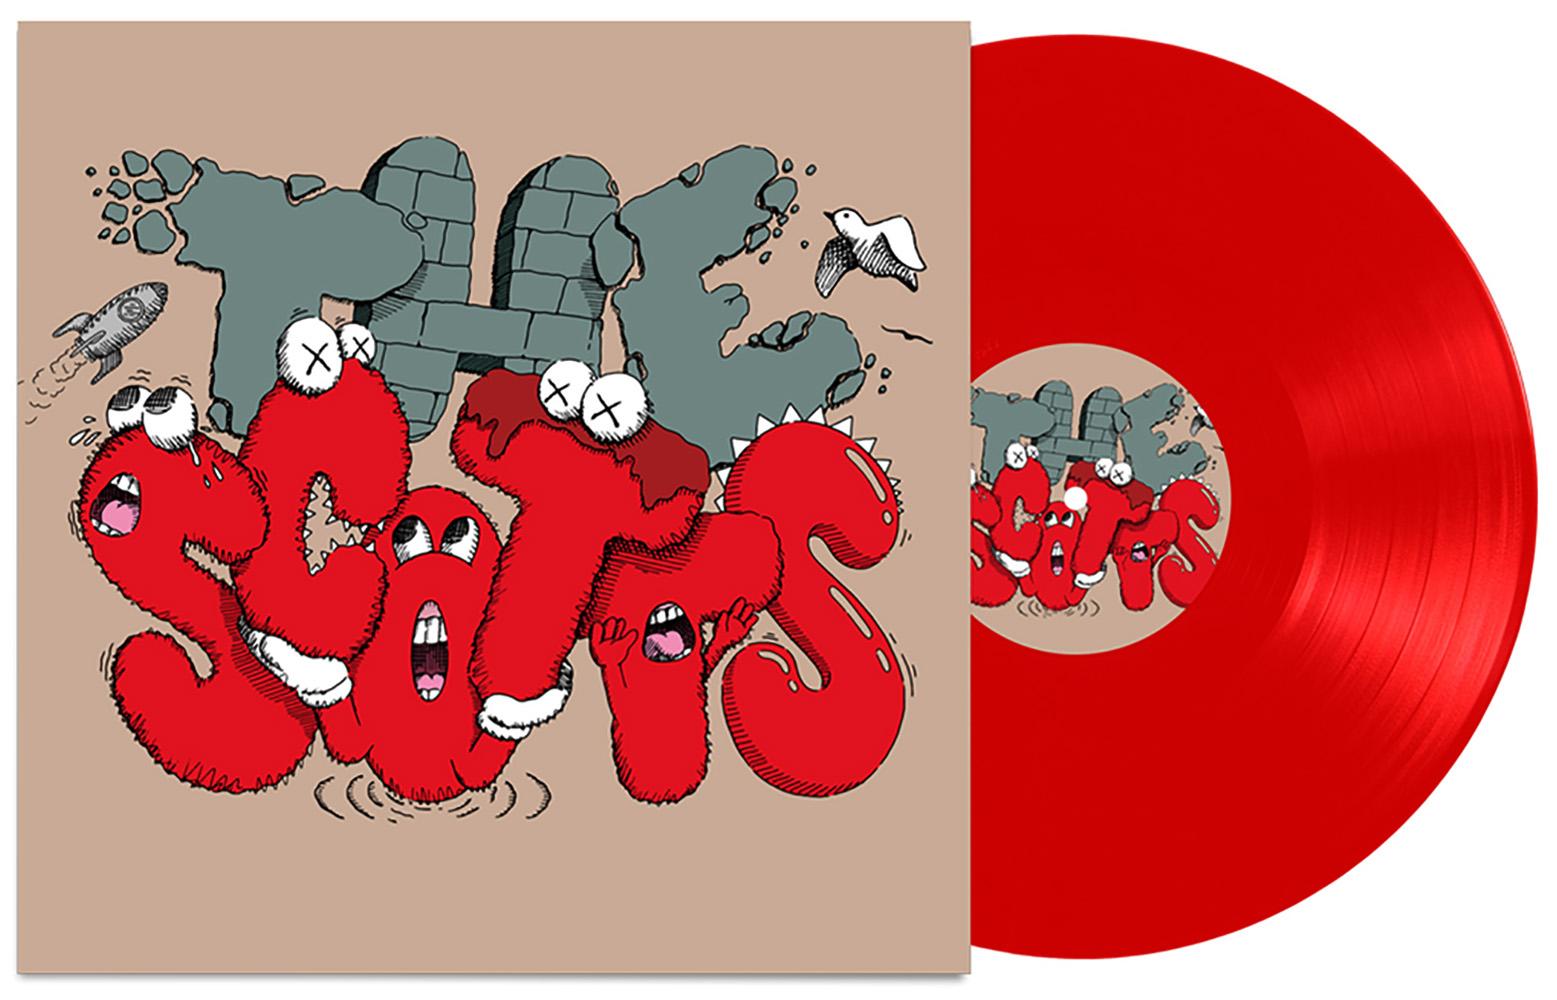 After KAWS Travis Scott Record Art, “The Scotts”:

Offset lithograph on vinyl record jacket & record labels. 2020.

Dimensions: 12 x 12 inches.

Condition: New/unopened in original shrink wrapping. Includes original record. 

Unsigned from a sold